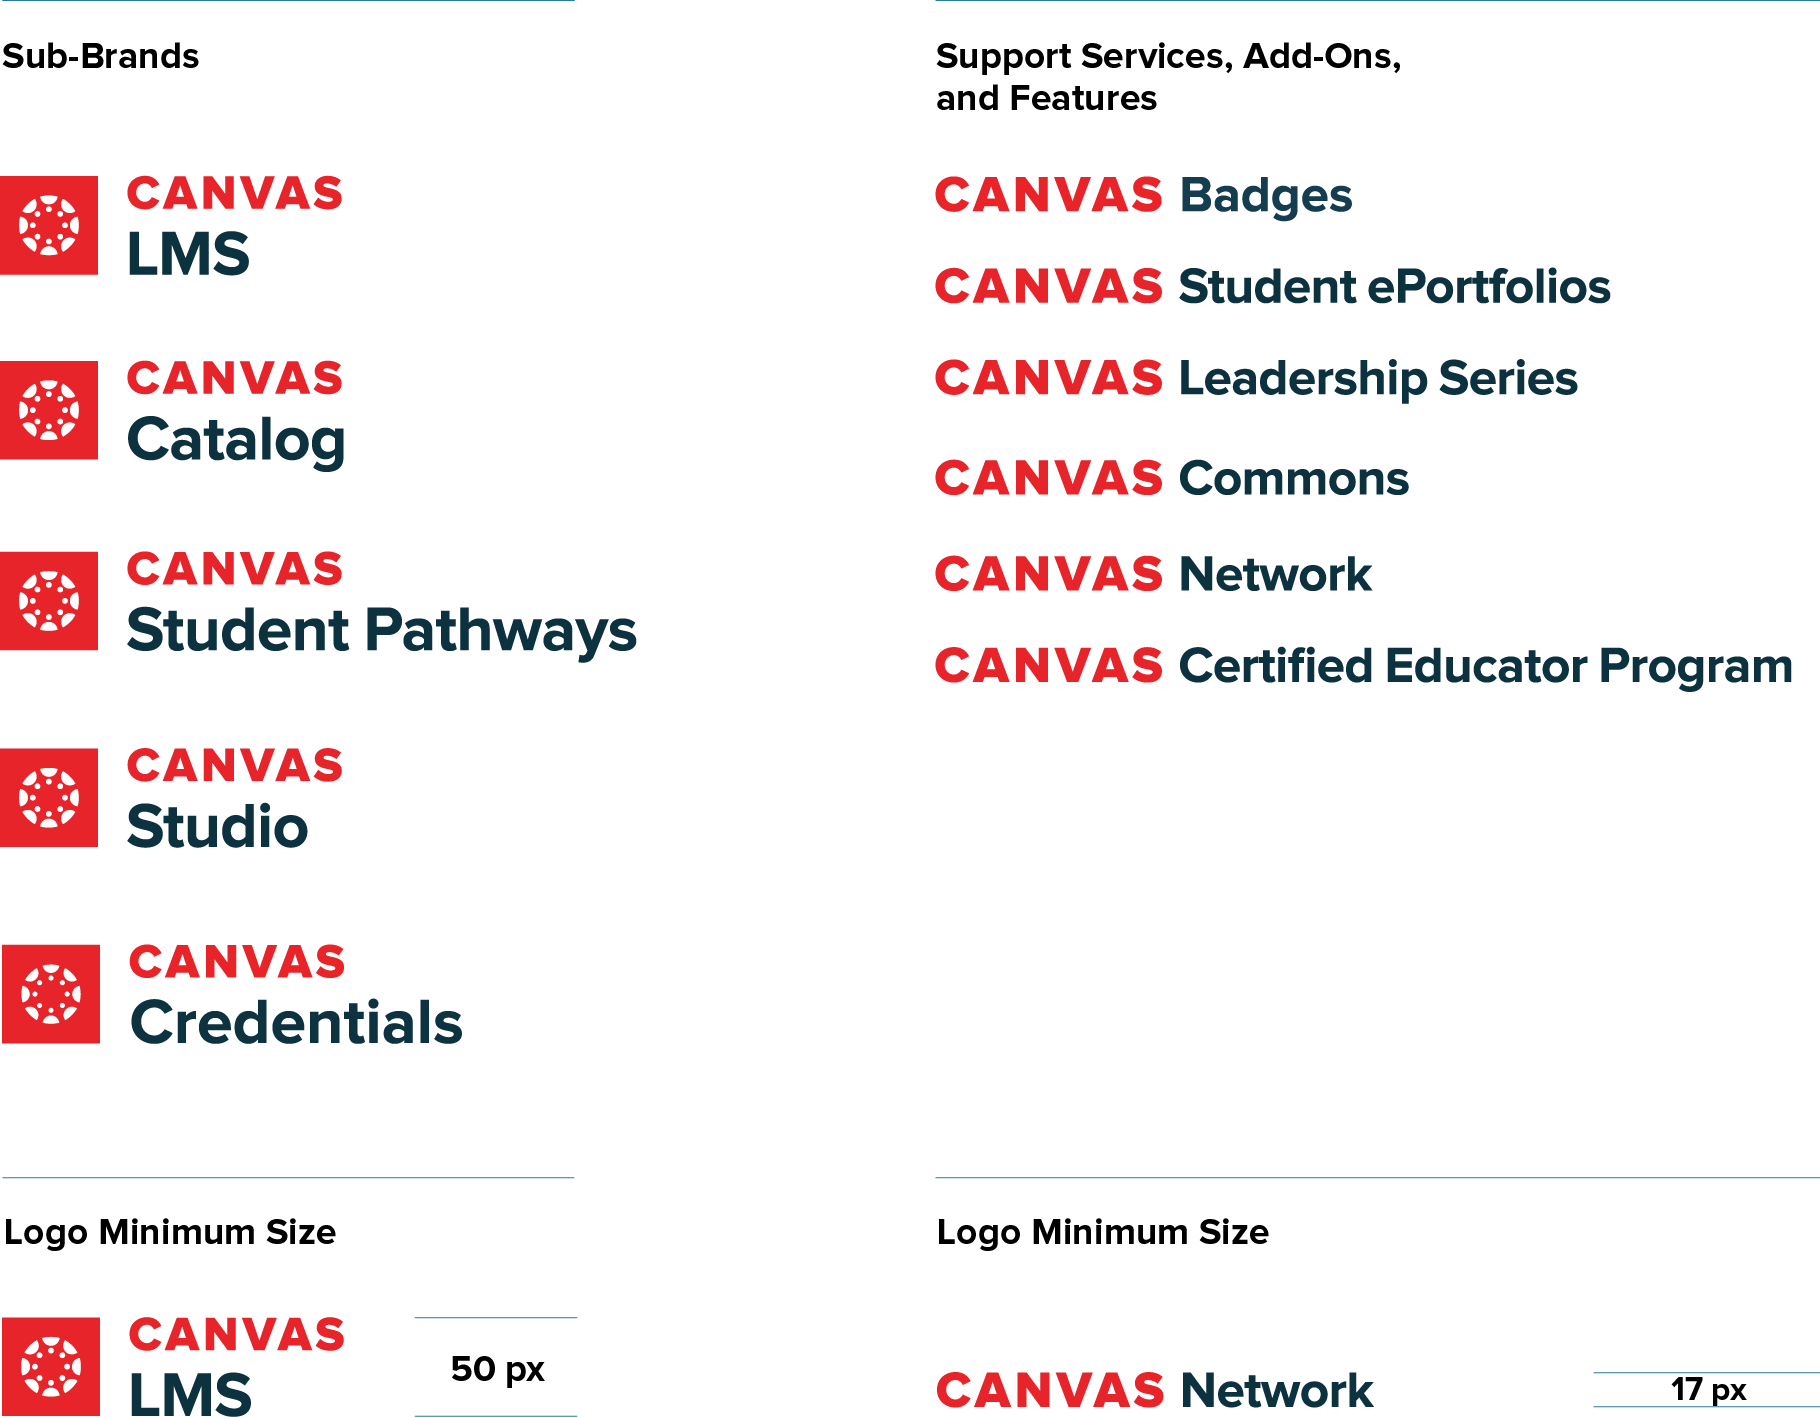 Canvas Sub-brands and services